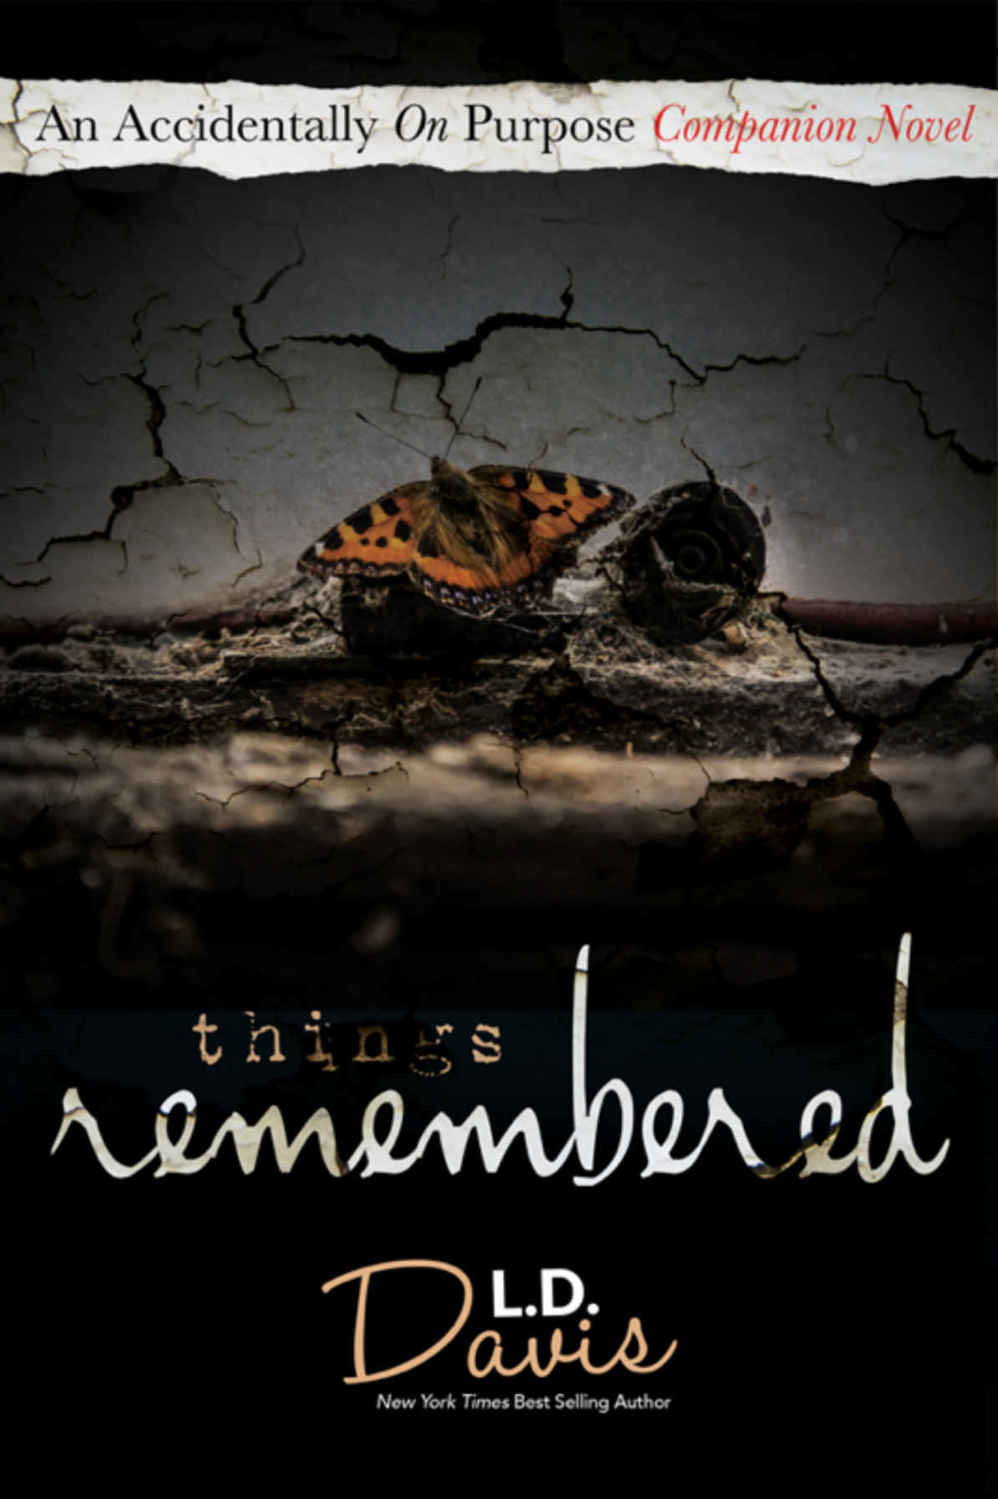 Things Remembered (Accidentally On Purpose Companion Novel #3)